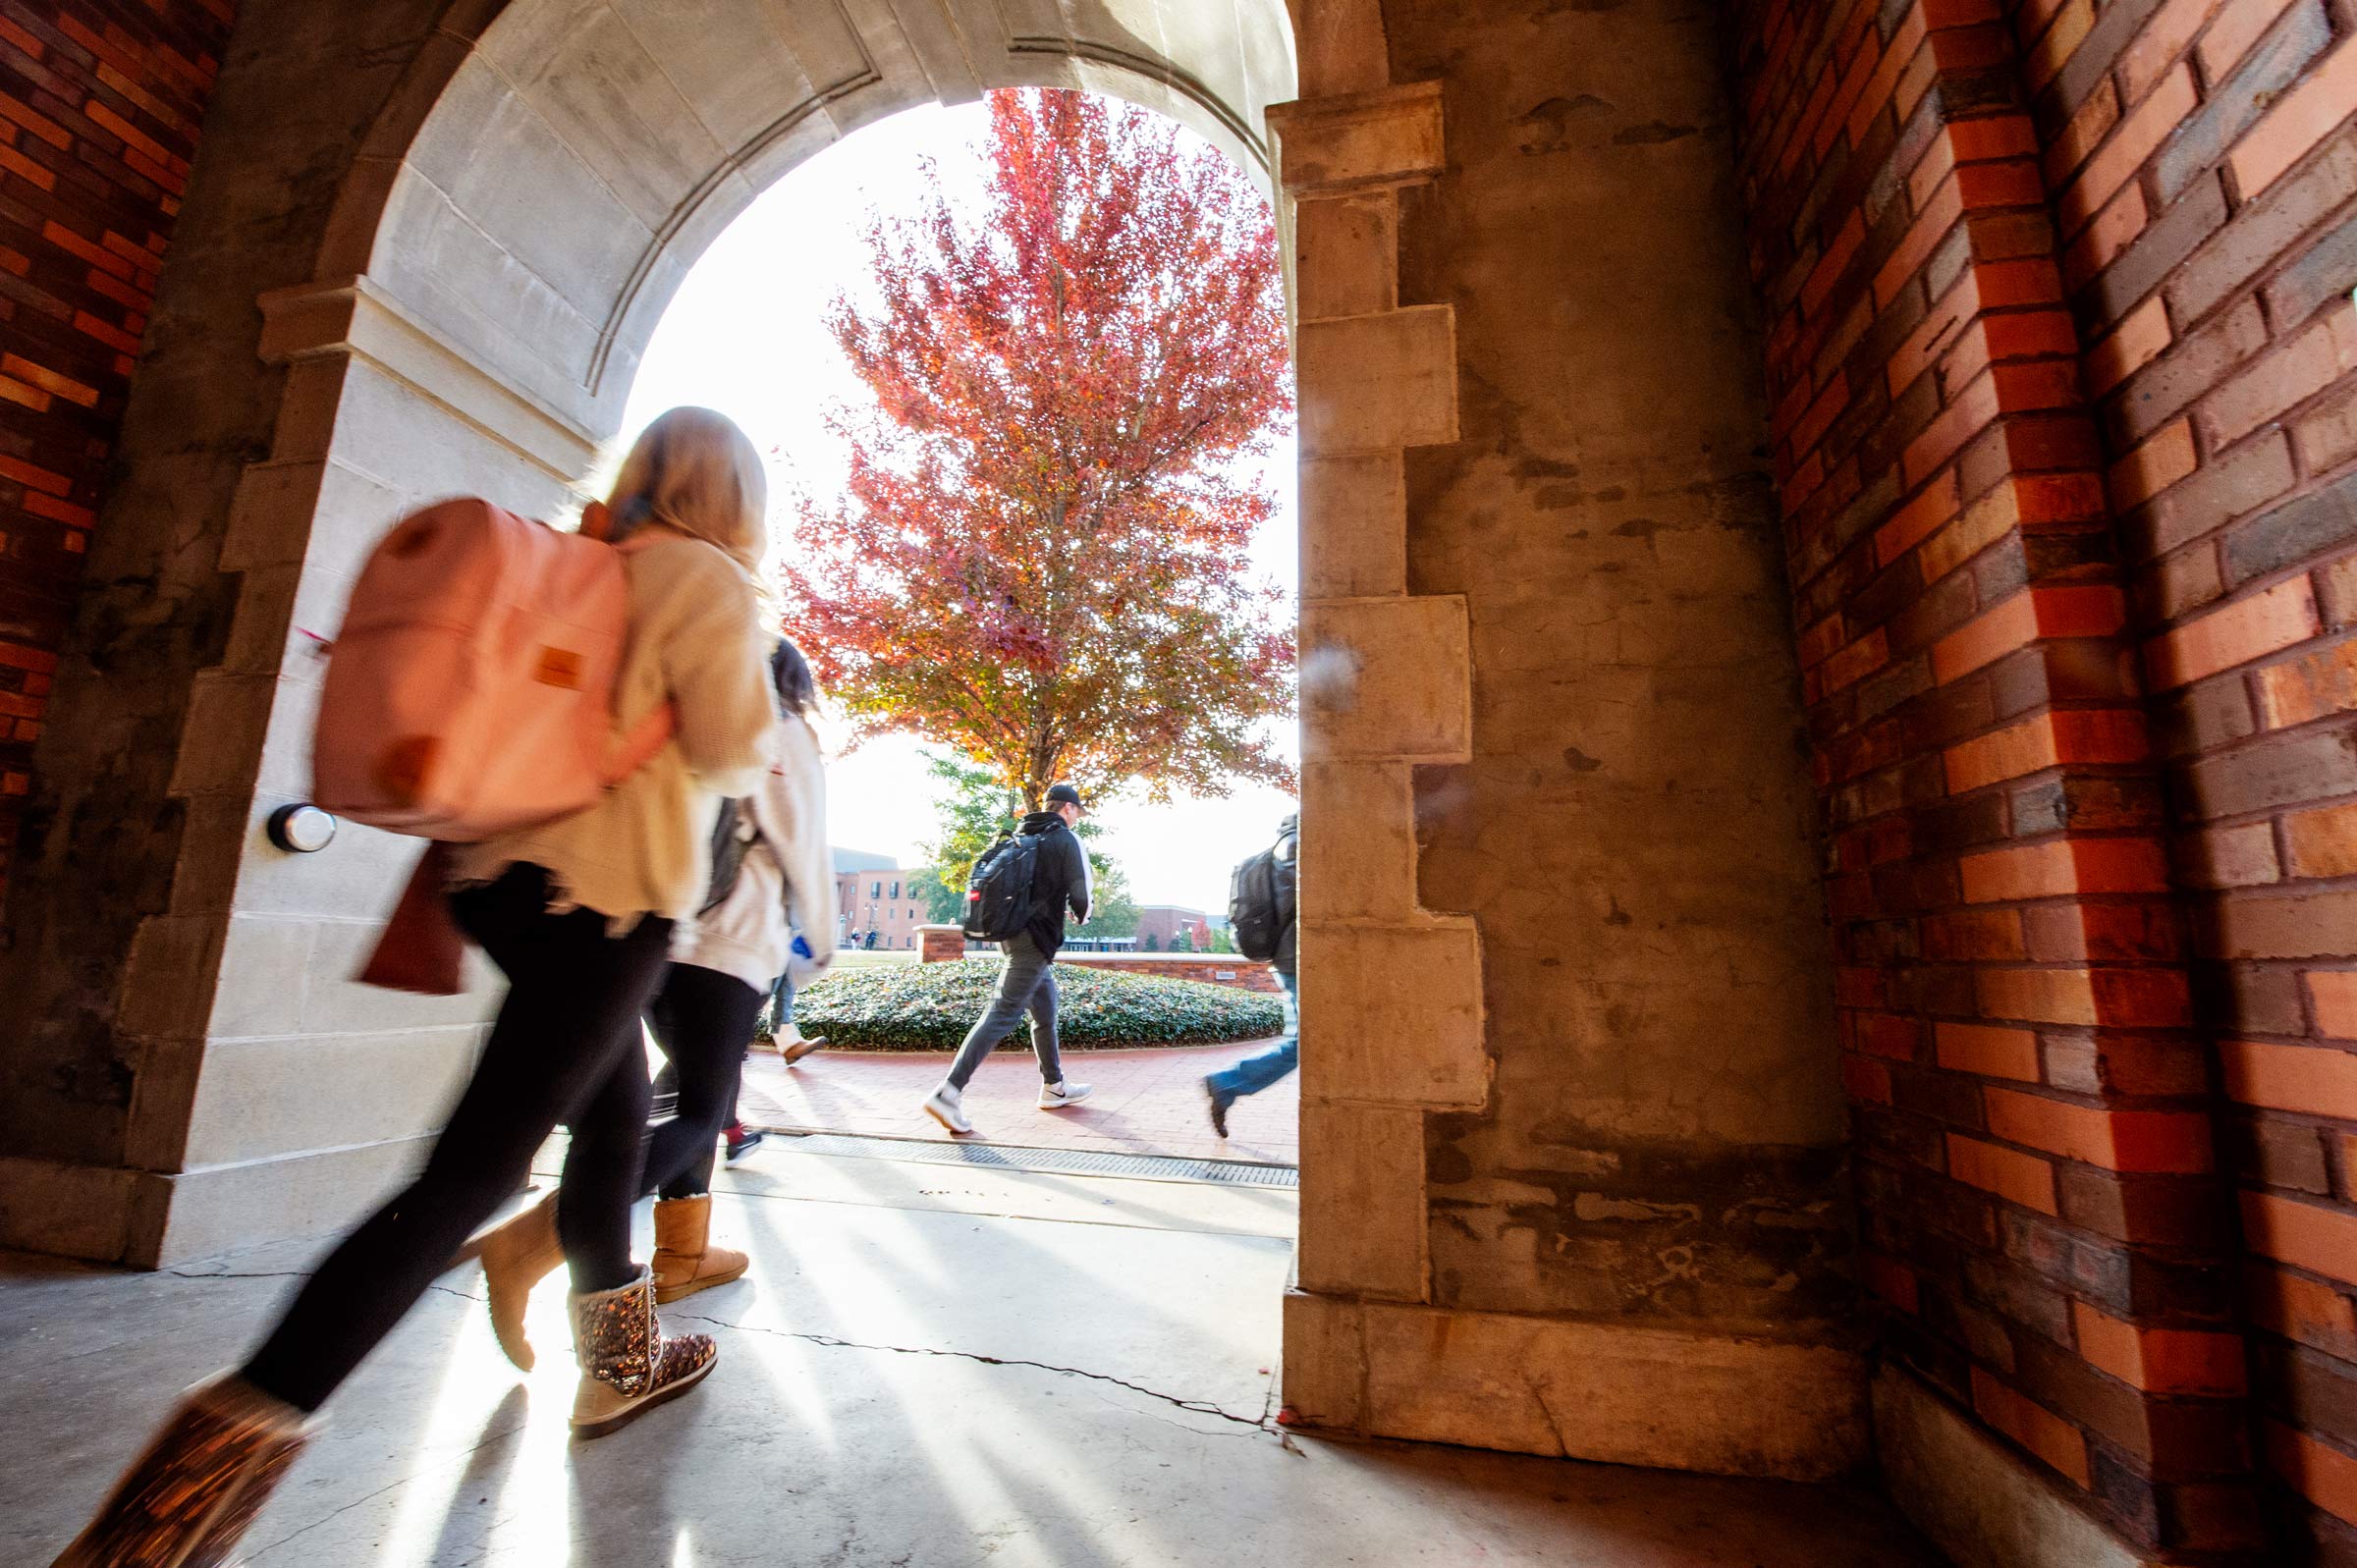 Students walk out of the McCain Hall arch with a maple tree&#039;s fall leaves framed in the doorway.